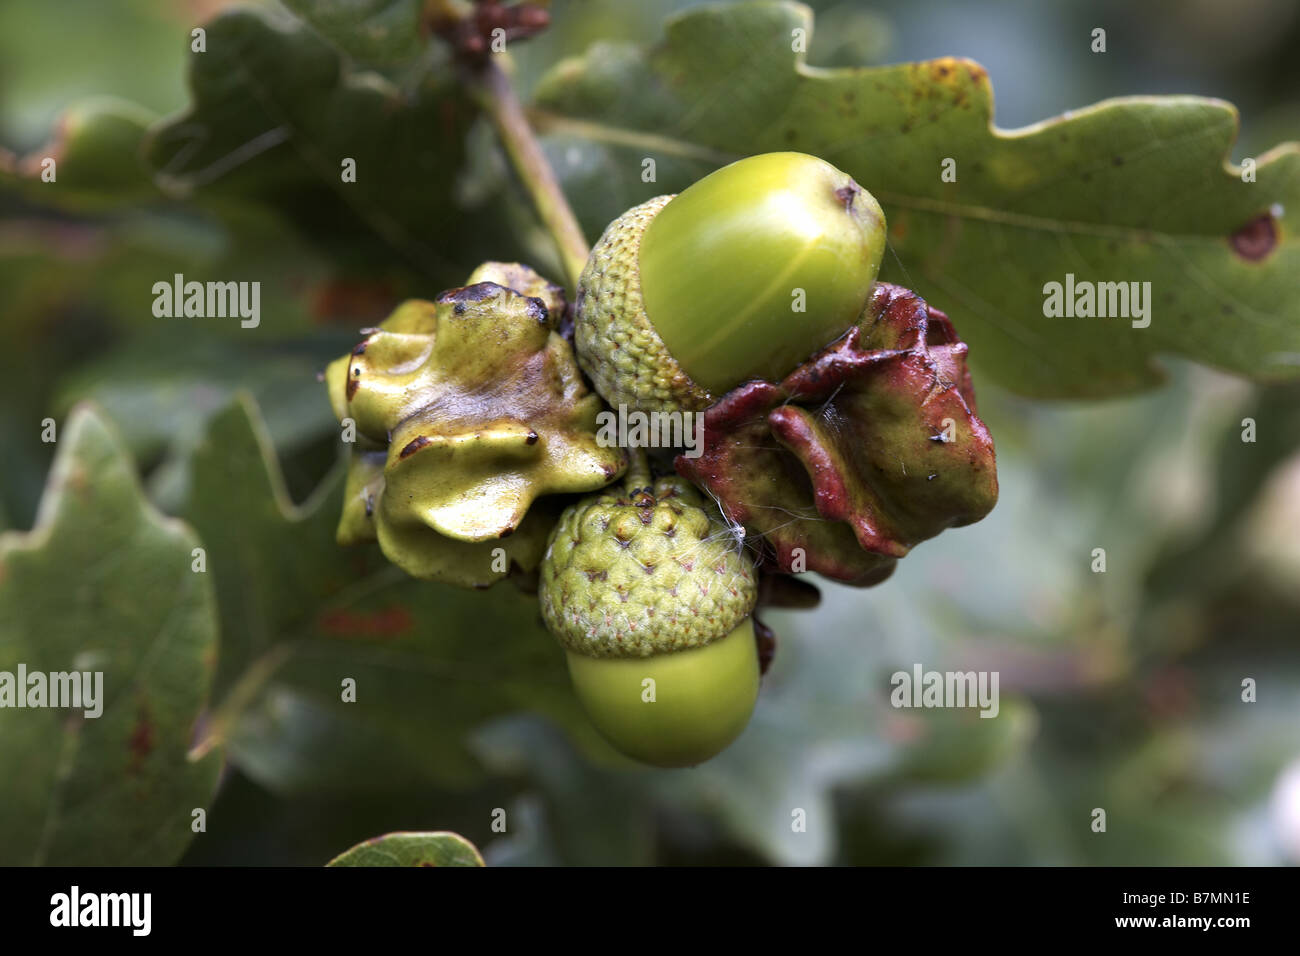 Knopper Gall Andricus quercuscalicis created on acorns in the autumn by a single agamic wasp Stock Photo